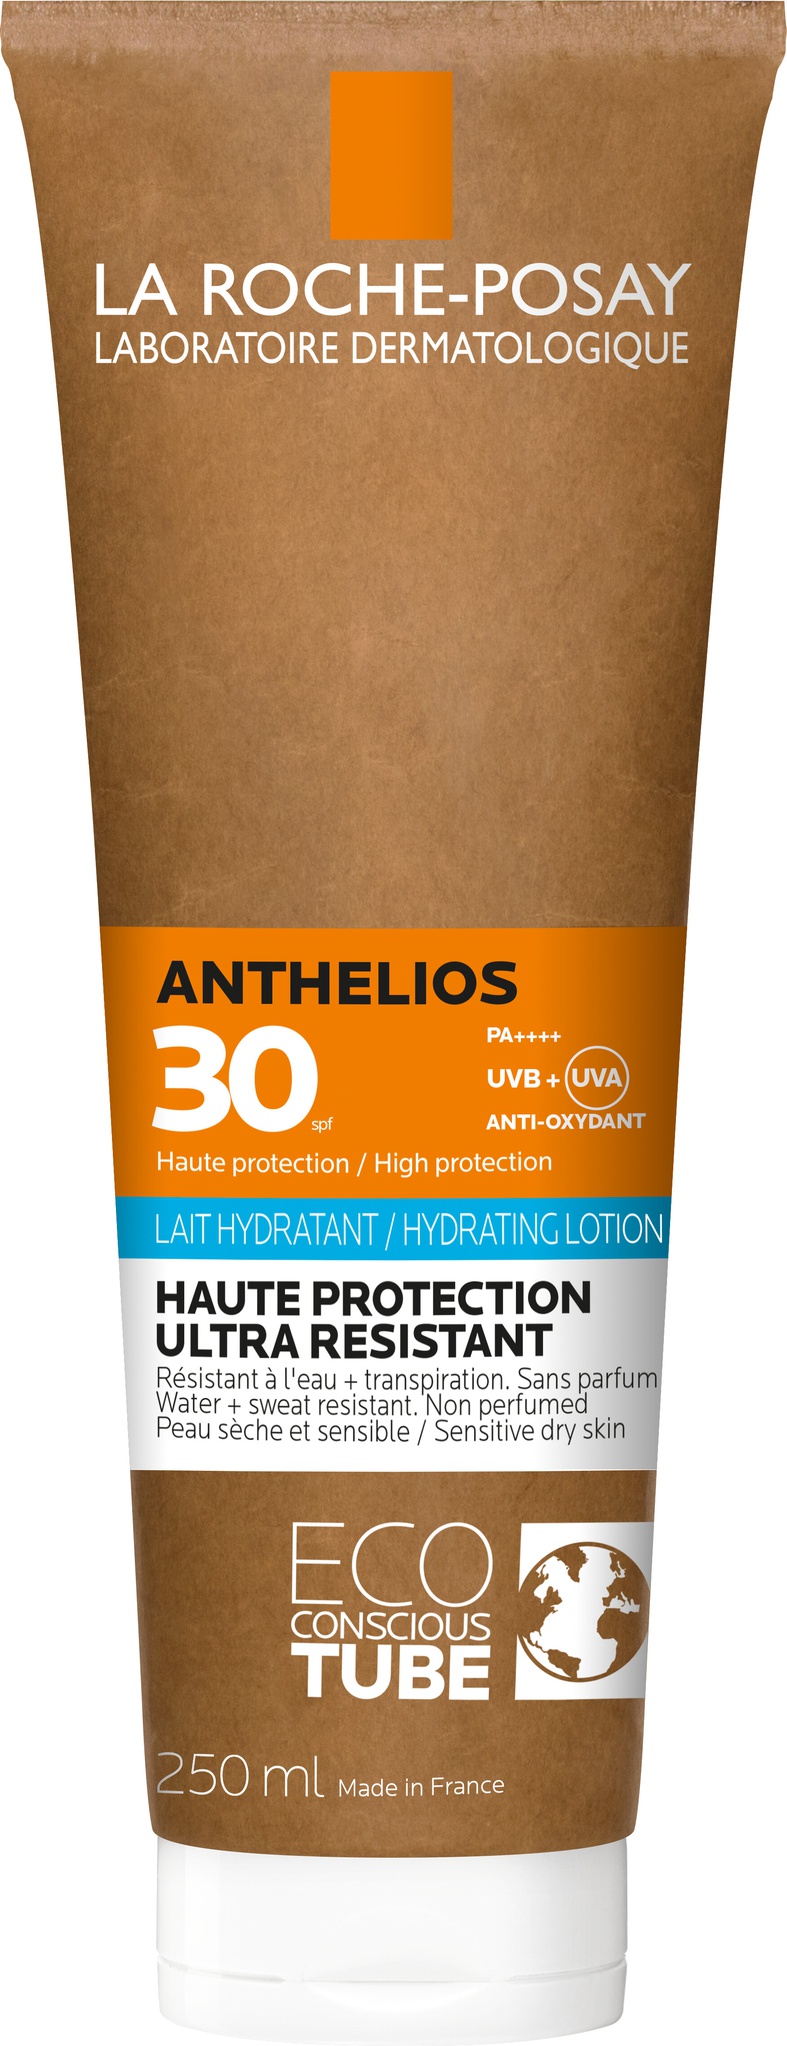 La Roche-Posay Anthelios Anthelios Eco Conscious Hydrating Lotion SPF30